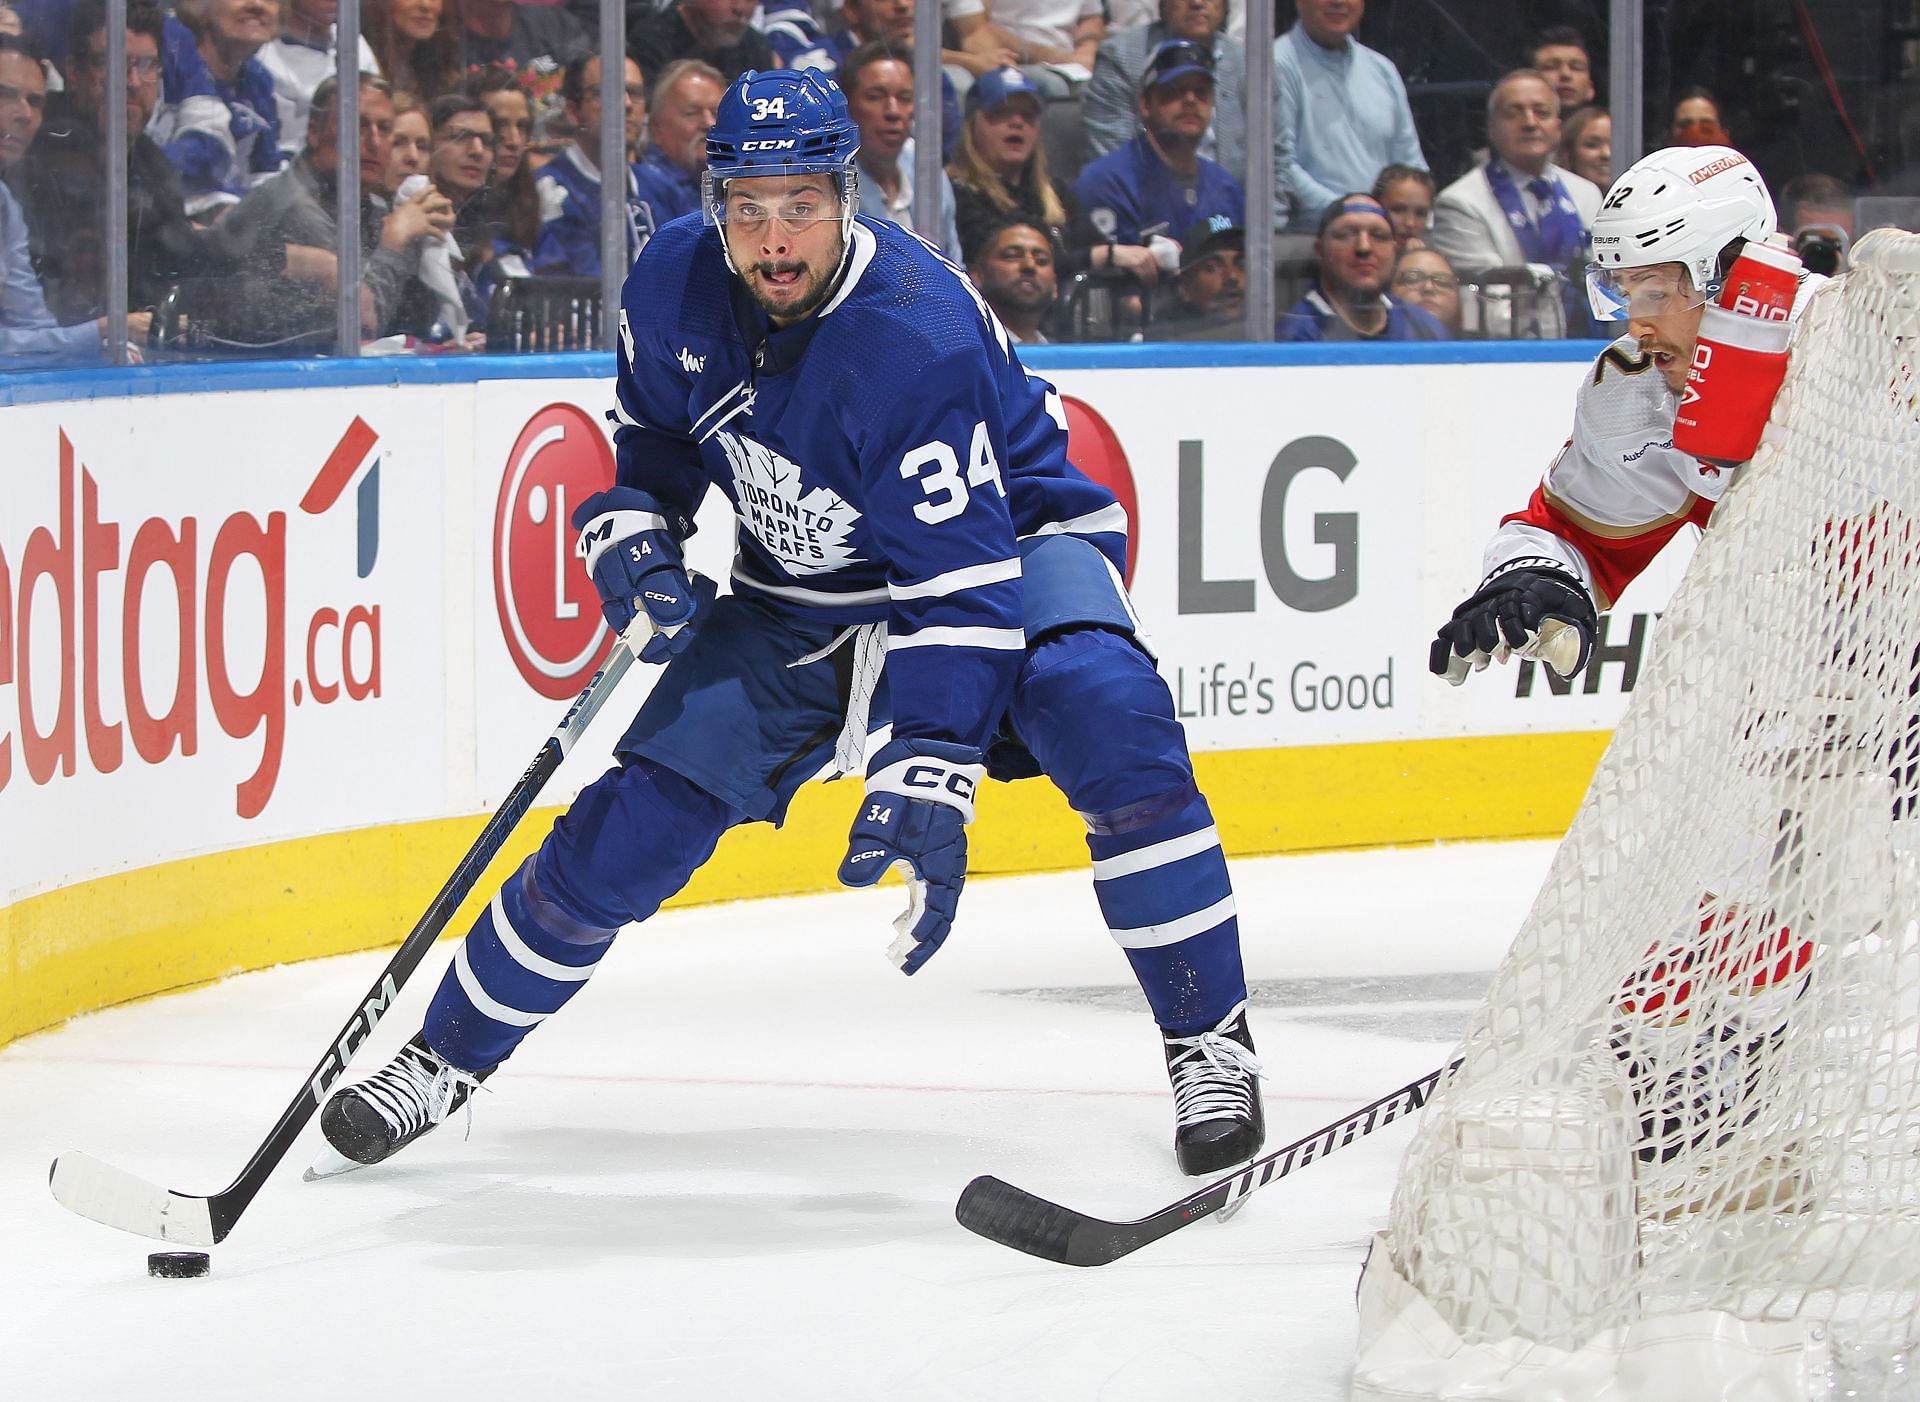 Game Preview: New Jersey Devils at Toronto Maple Leafs - All About